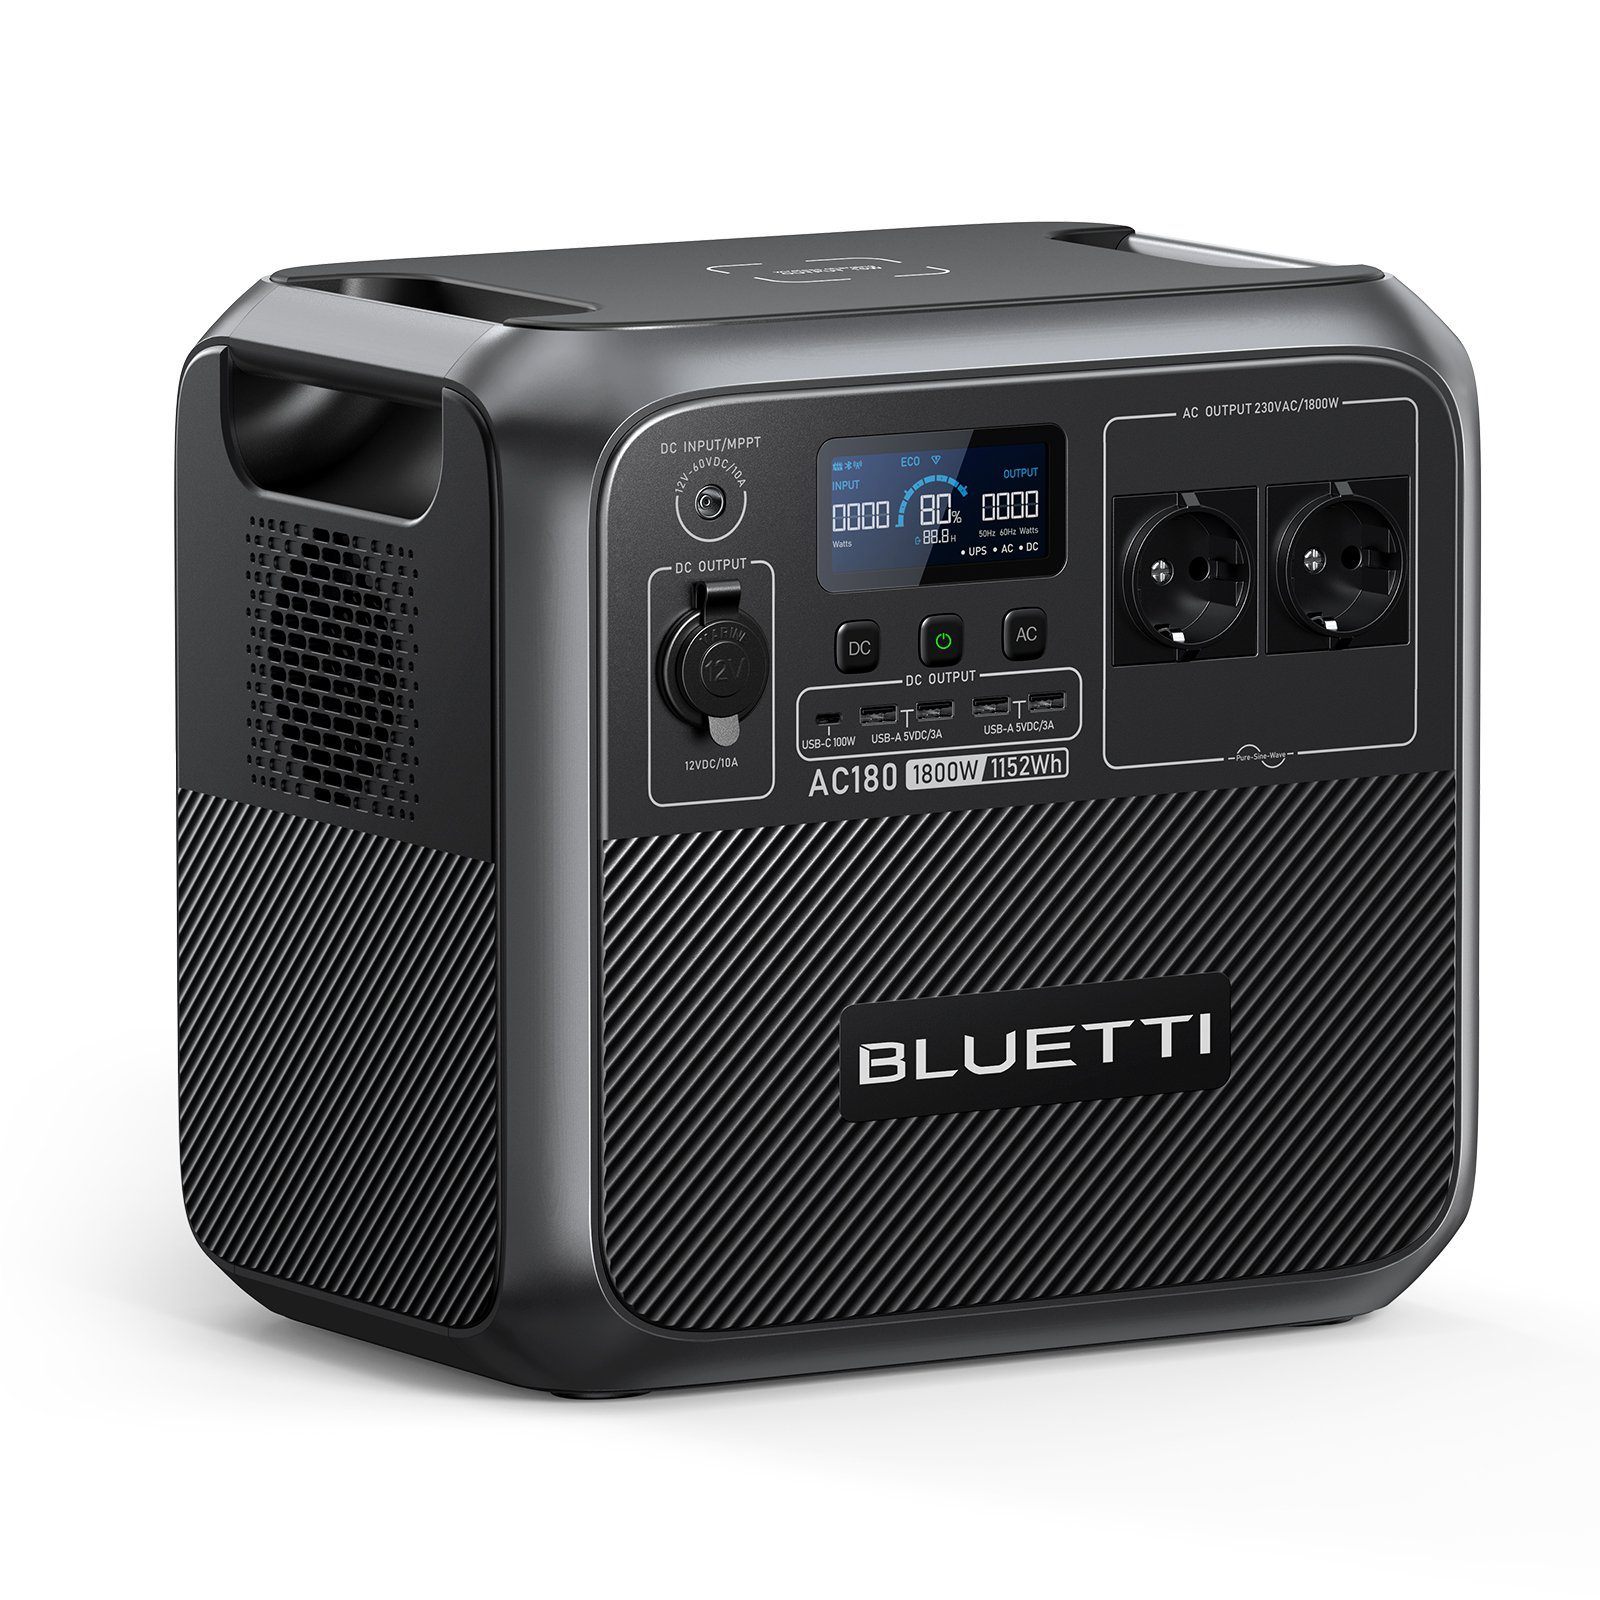 BLUETTI Генератори AC180 1800W/1152 Wh Tragbare Powerstation, 1,80 in kW, (packung, LiFePO4 Batterie mit AC (220–224 V) und DC-Ausgang), PD 100W,für Camping, Reise, Stromausfall